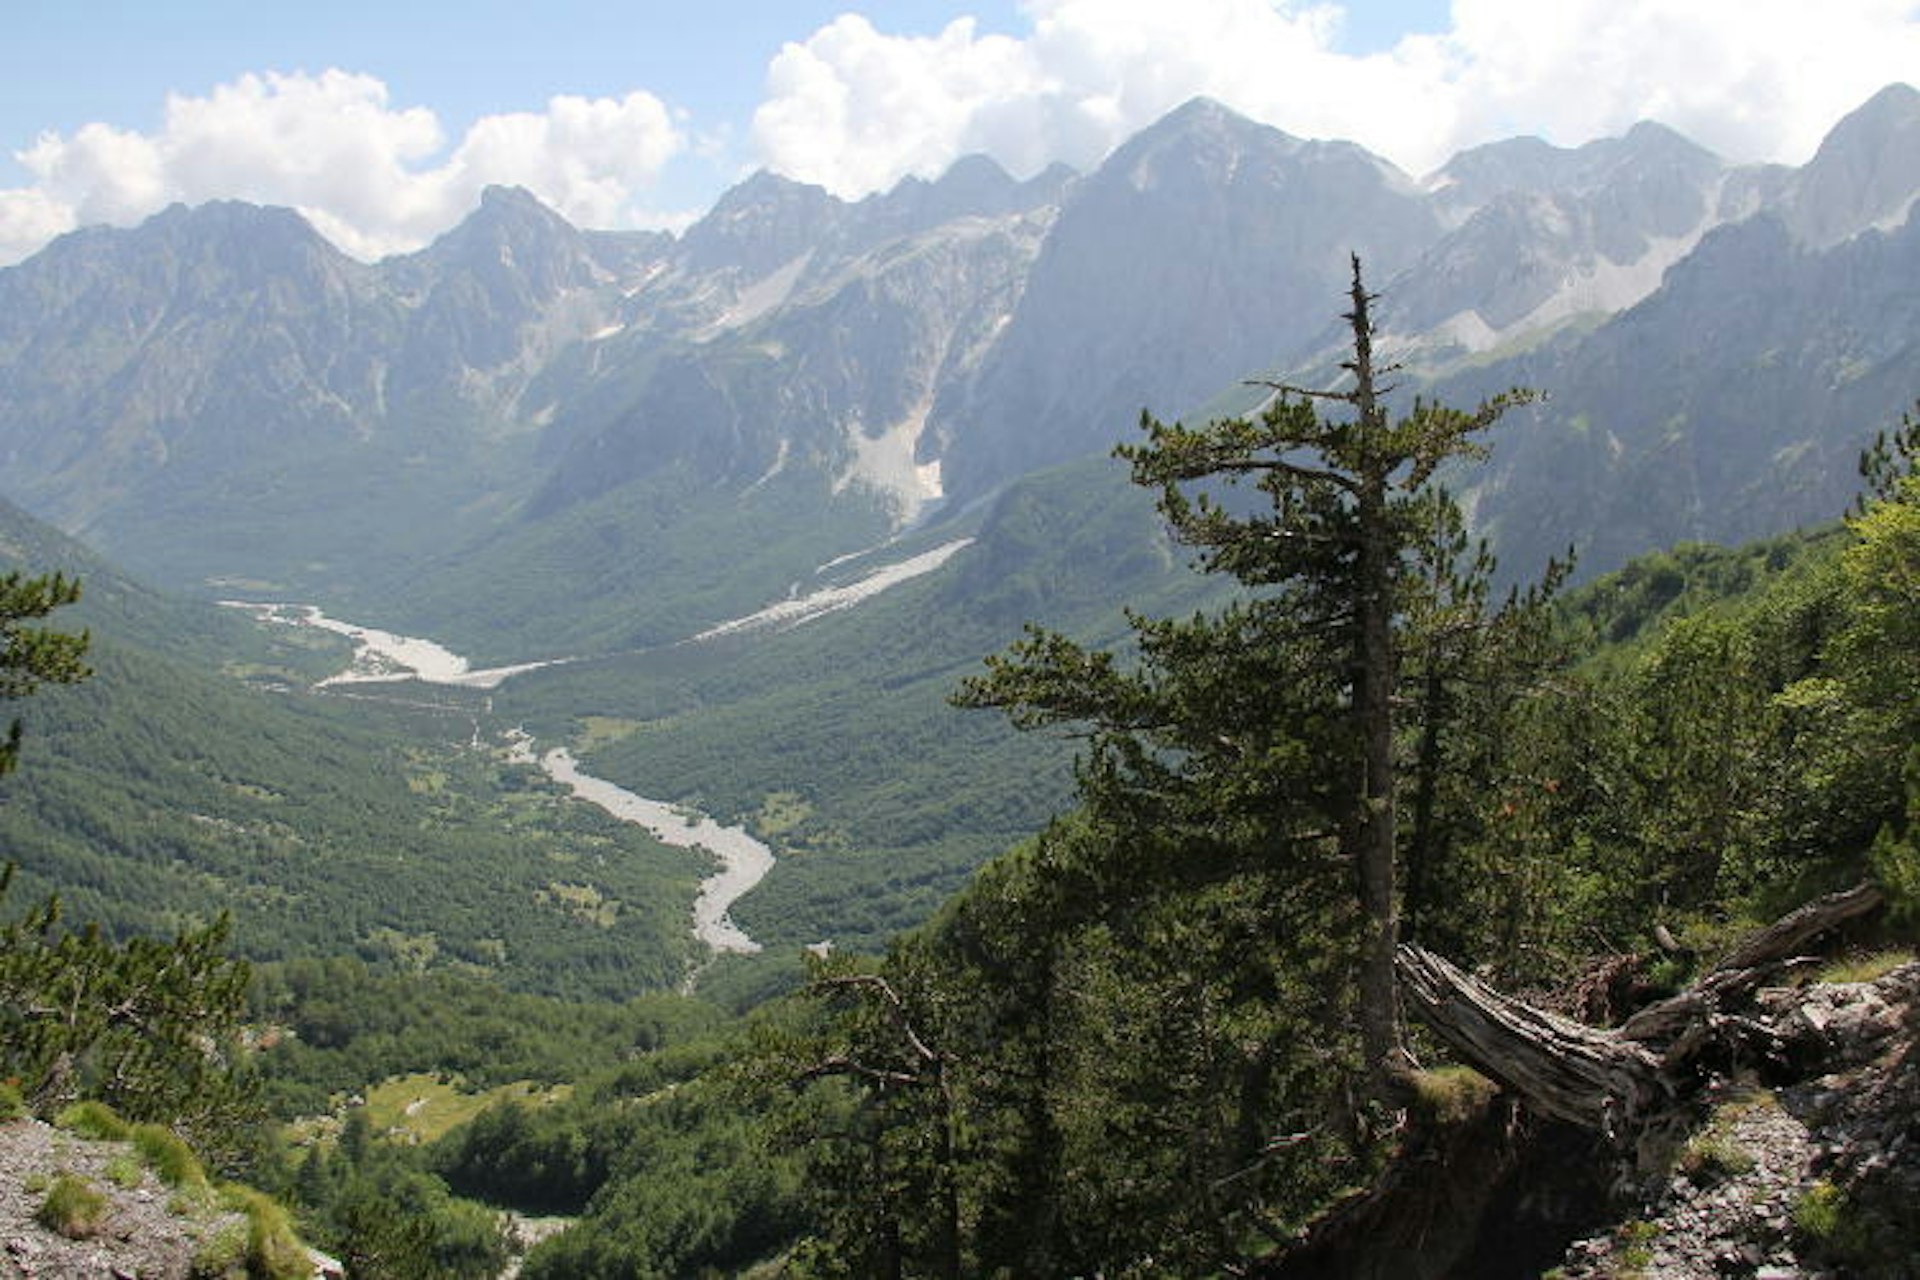 Looking back towards the Valbona River from the mountainside. Image by Tom Masters / Lonely Planet